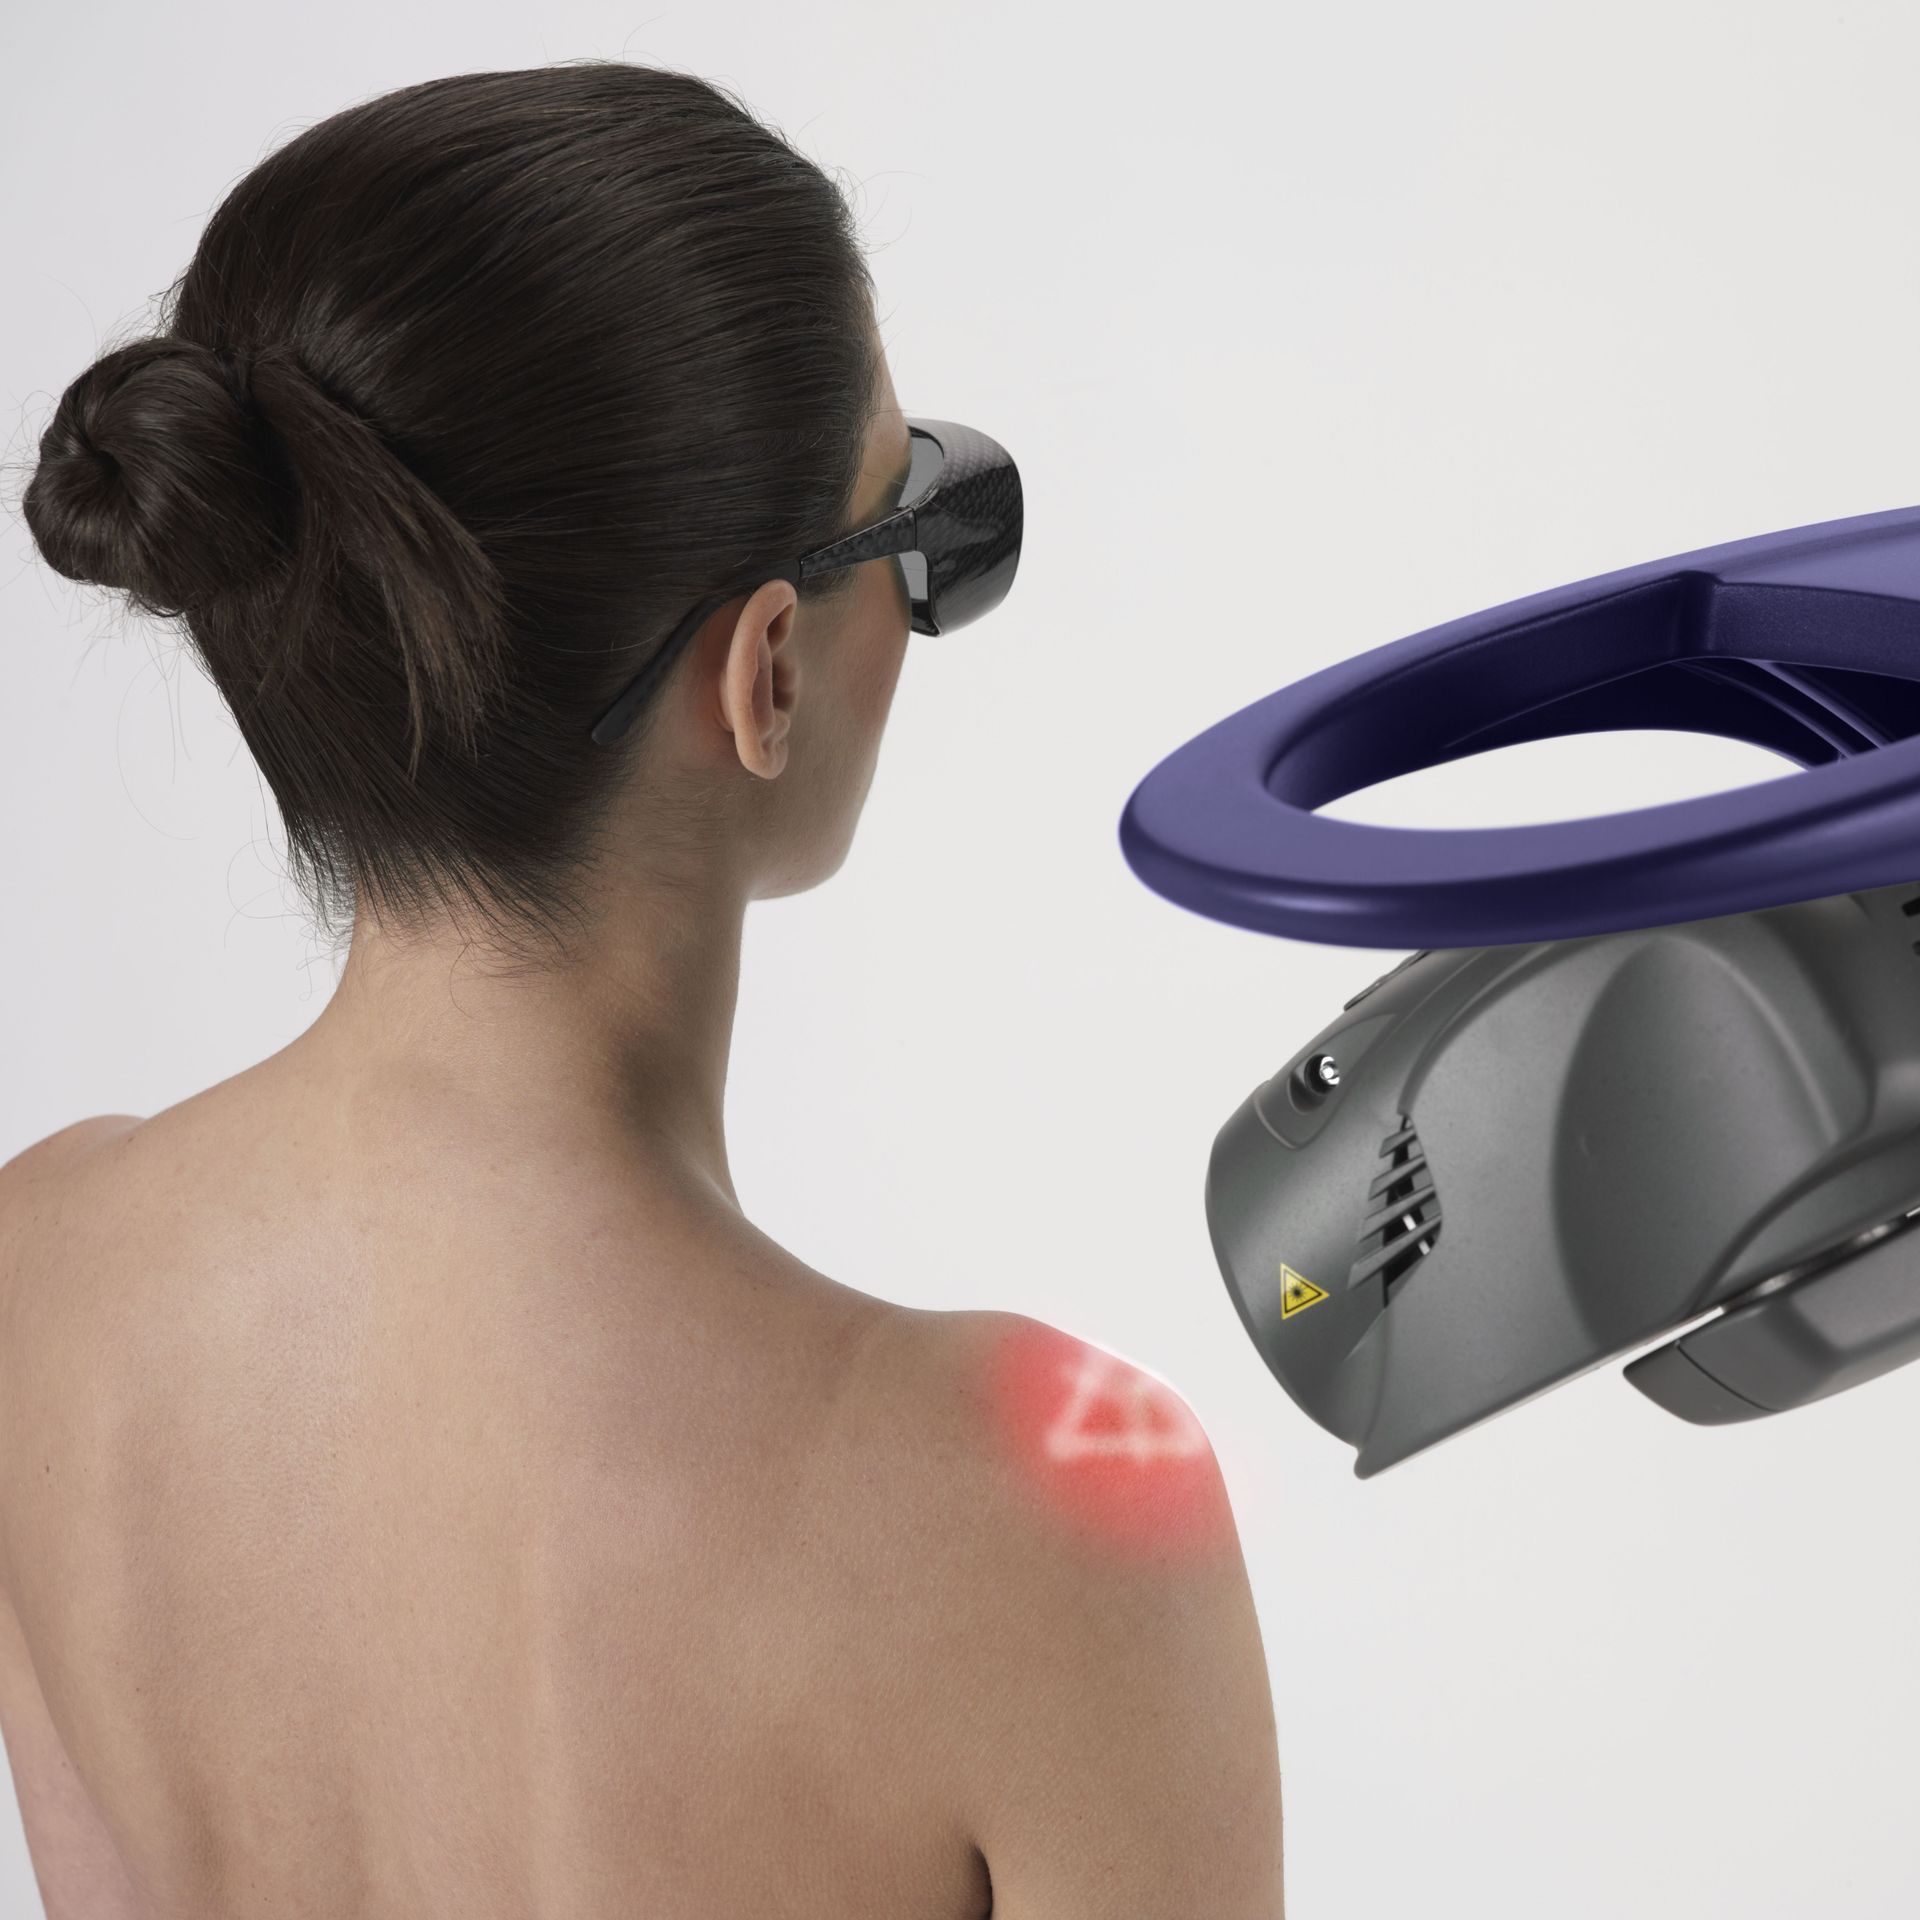 A woman is getting a laser treatment on her shoulder